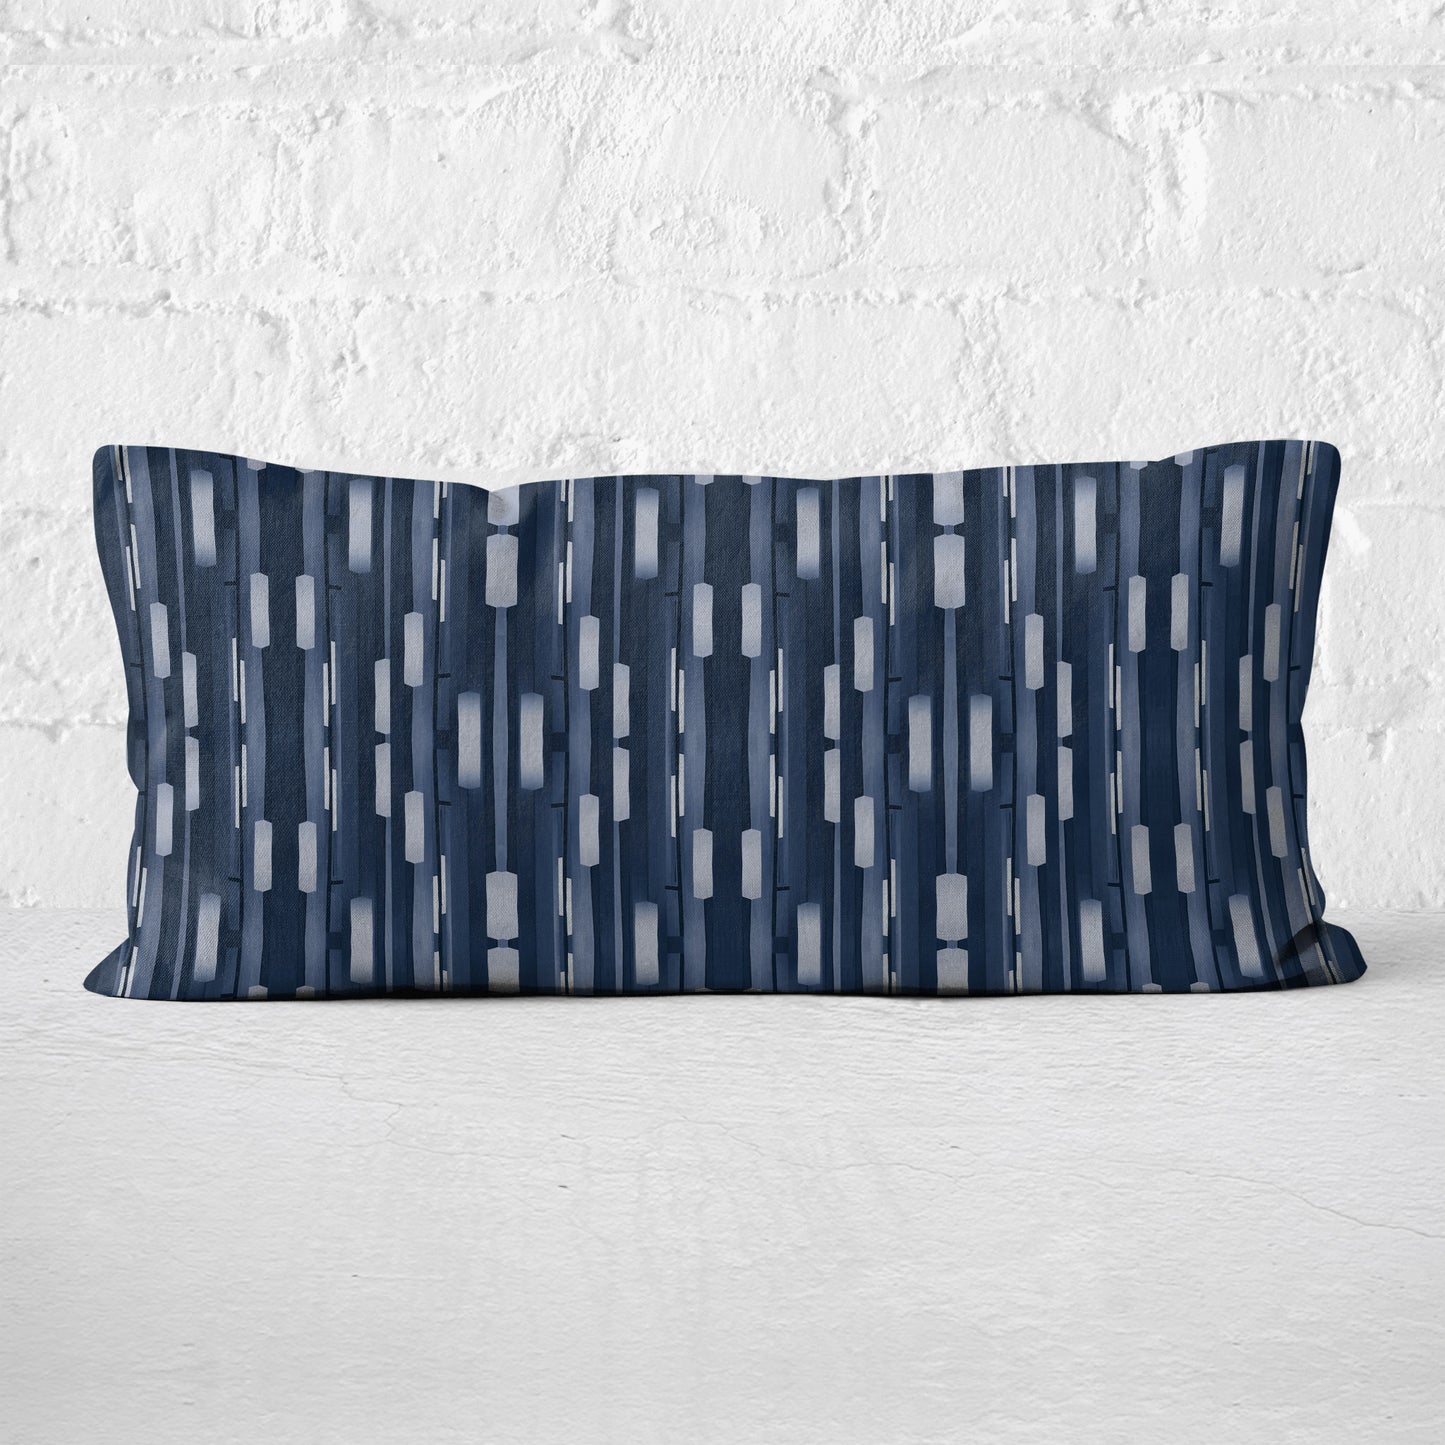 Rectangular lumbar pillow featuring a collaged stripe pattern in blue and white leaning against a white brick wall.